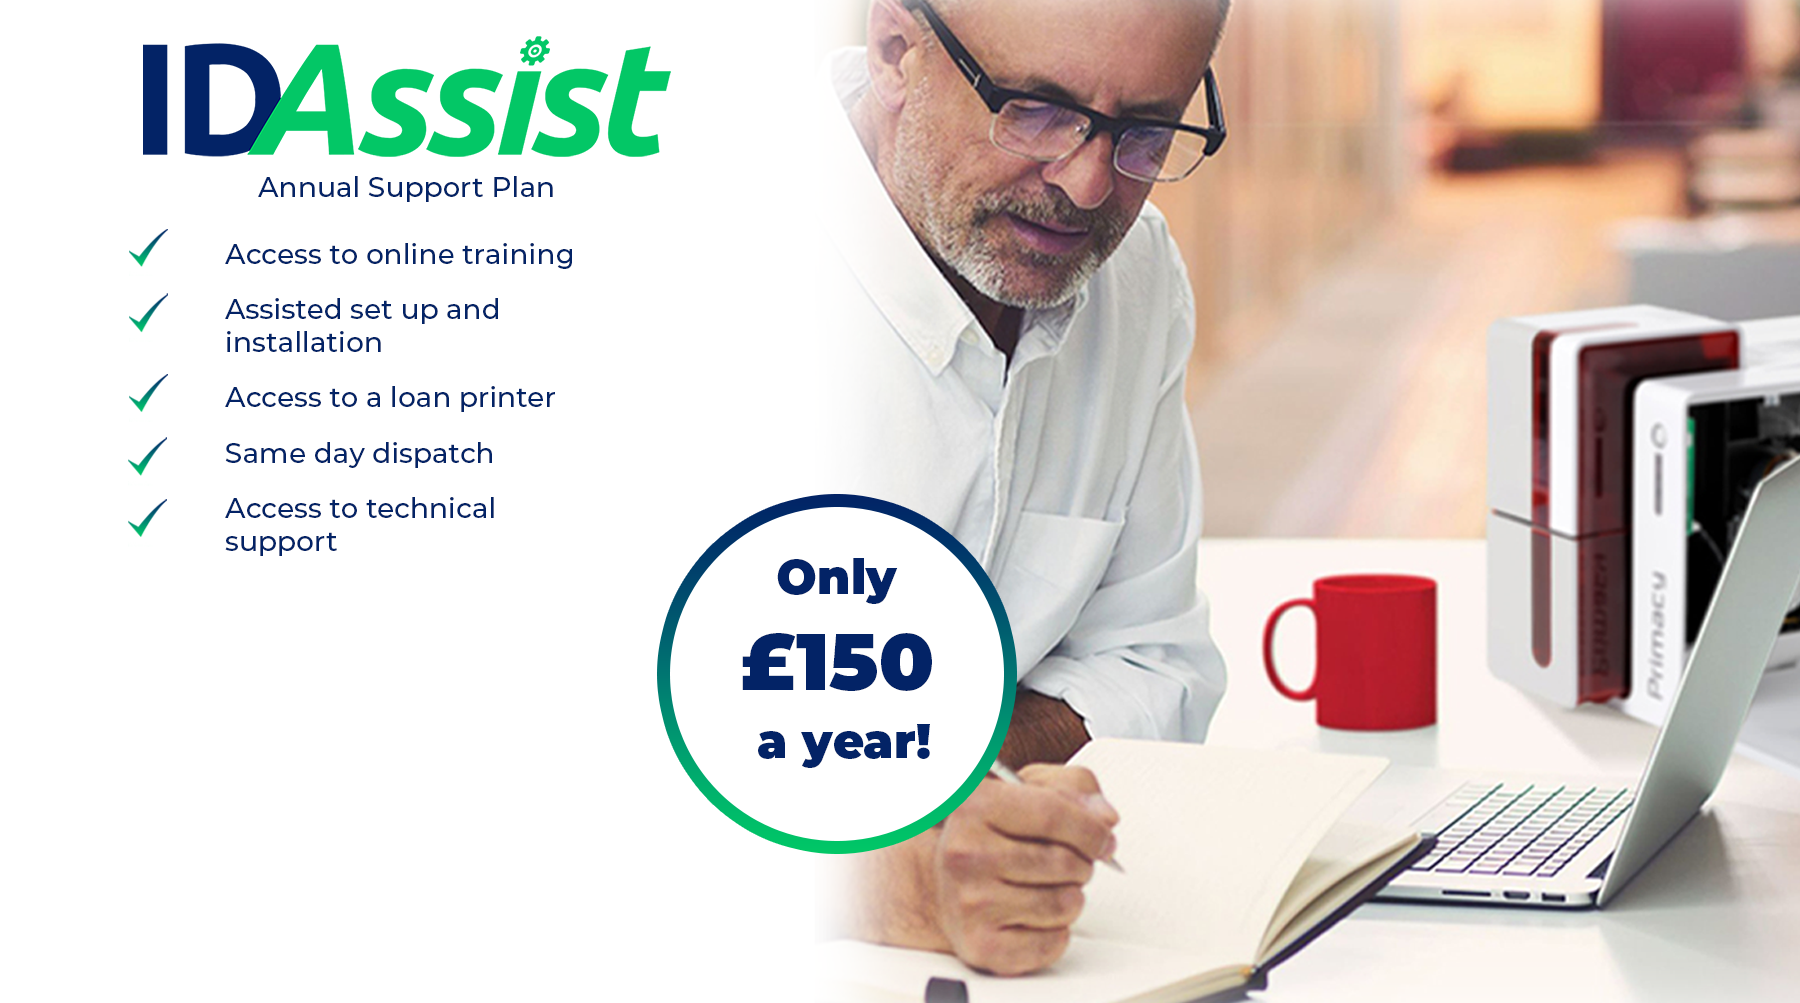 IDAssist Annual Support Plan - Access to online training - Assisted set up and installation - Access to a loan printer - Same day dispatch - Access to technical support - Only £150 a year!